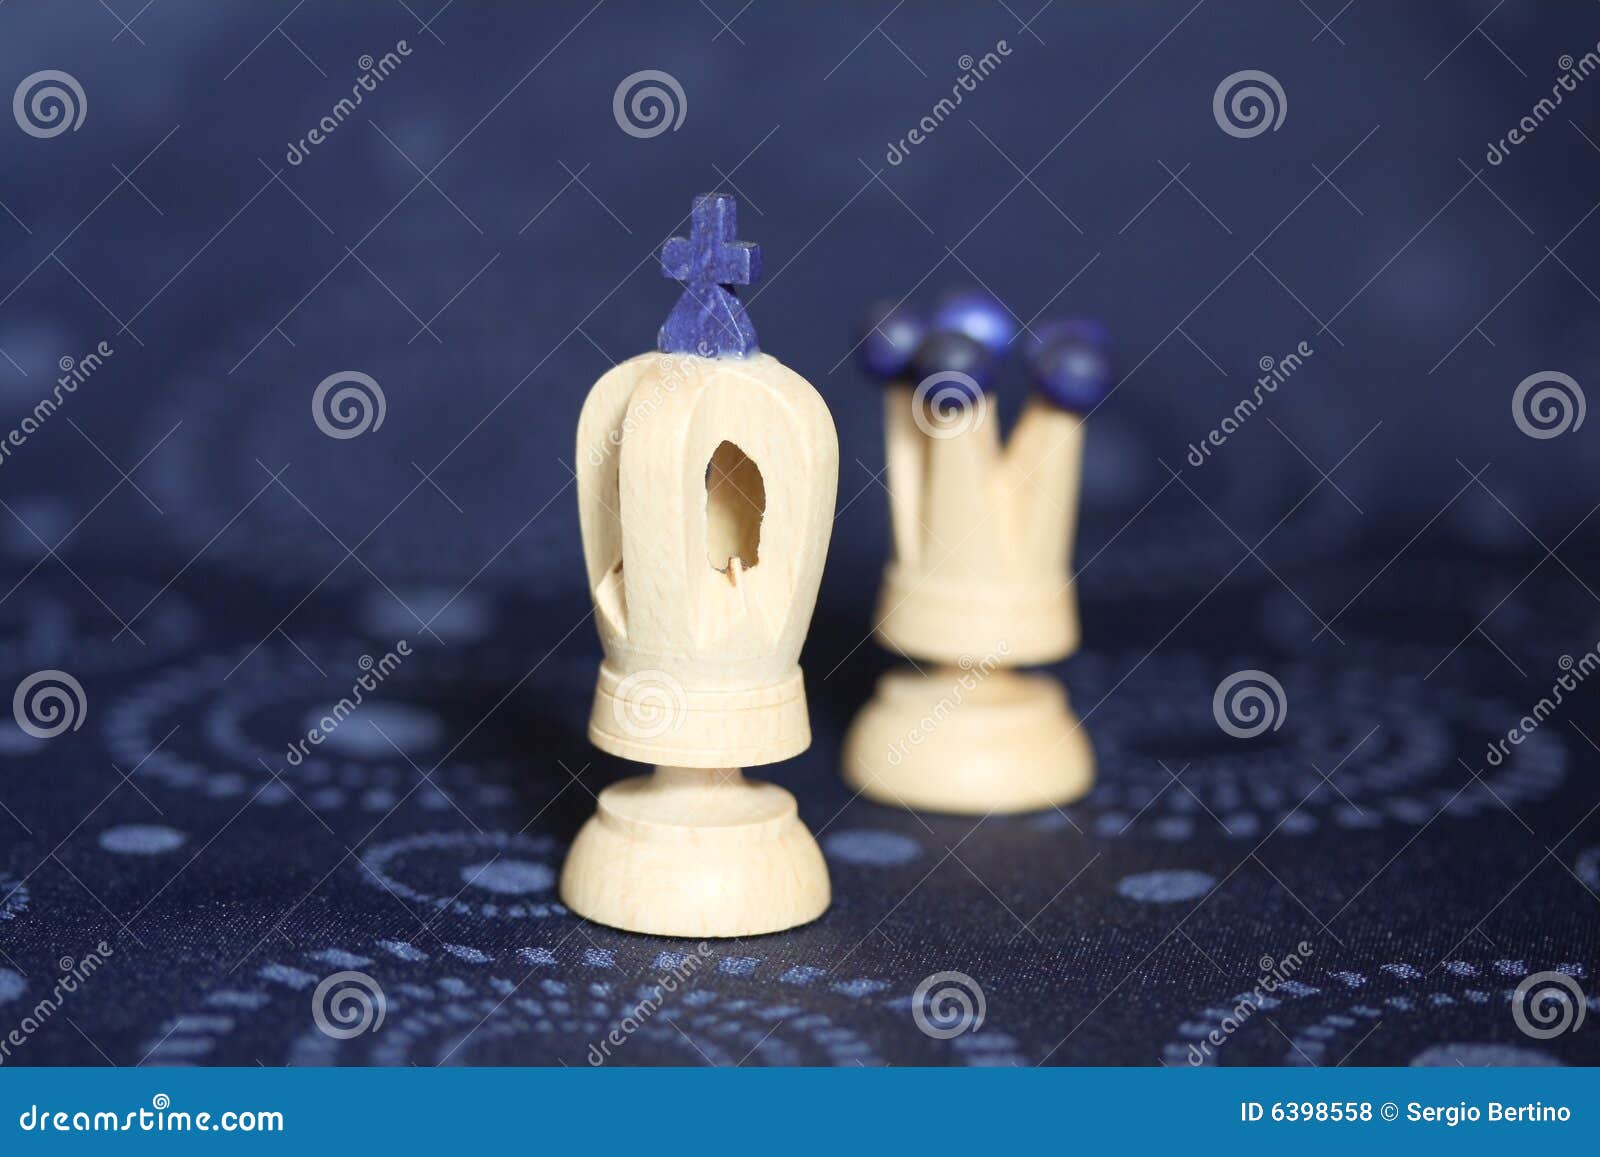 King And Queen Chess Pieces Stock Photo Image Of Blue